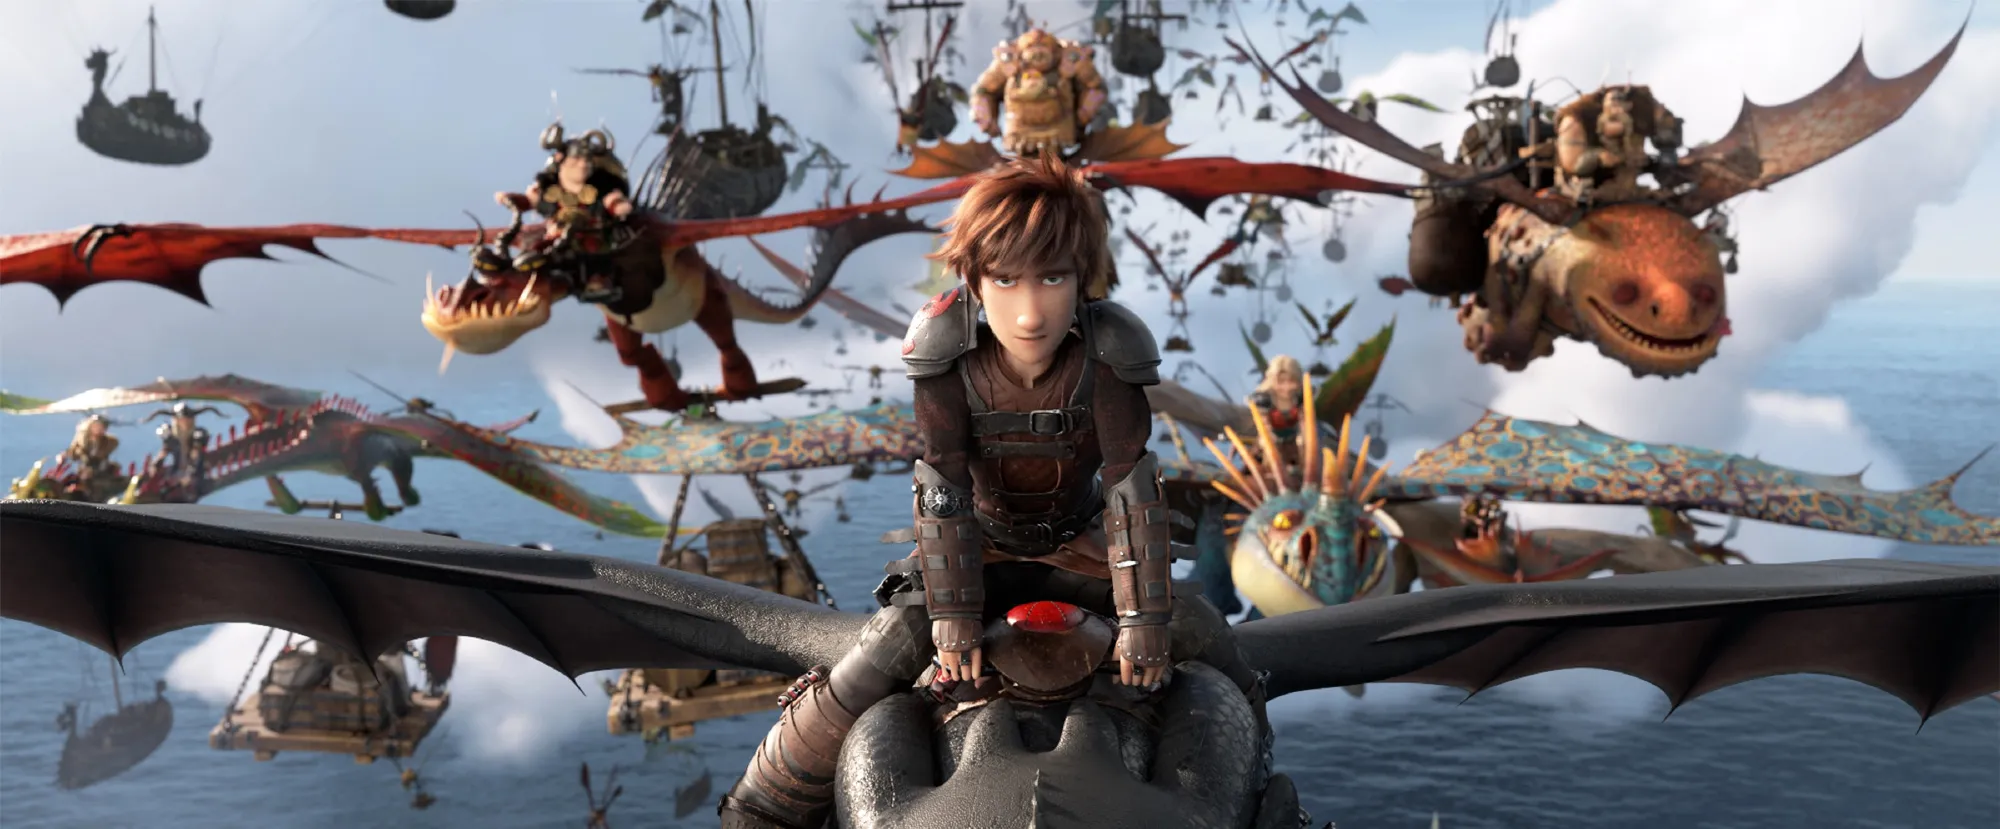 'How to Train Your Dragon': Hit Animated Series Announces Live-Action Film, Set for March 14, 2025, in Northern America | FMV6